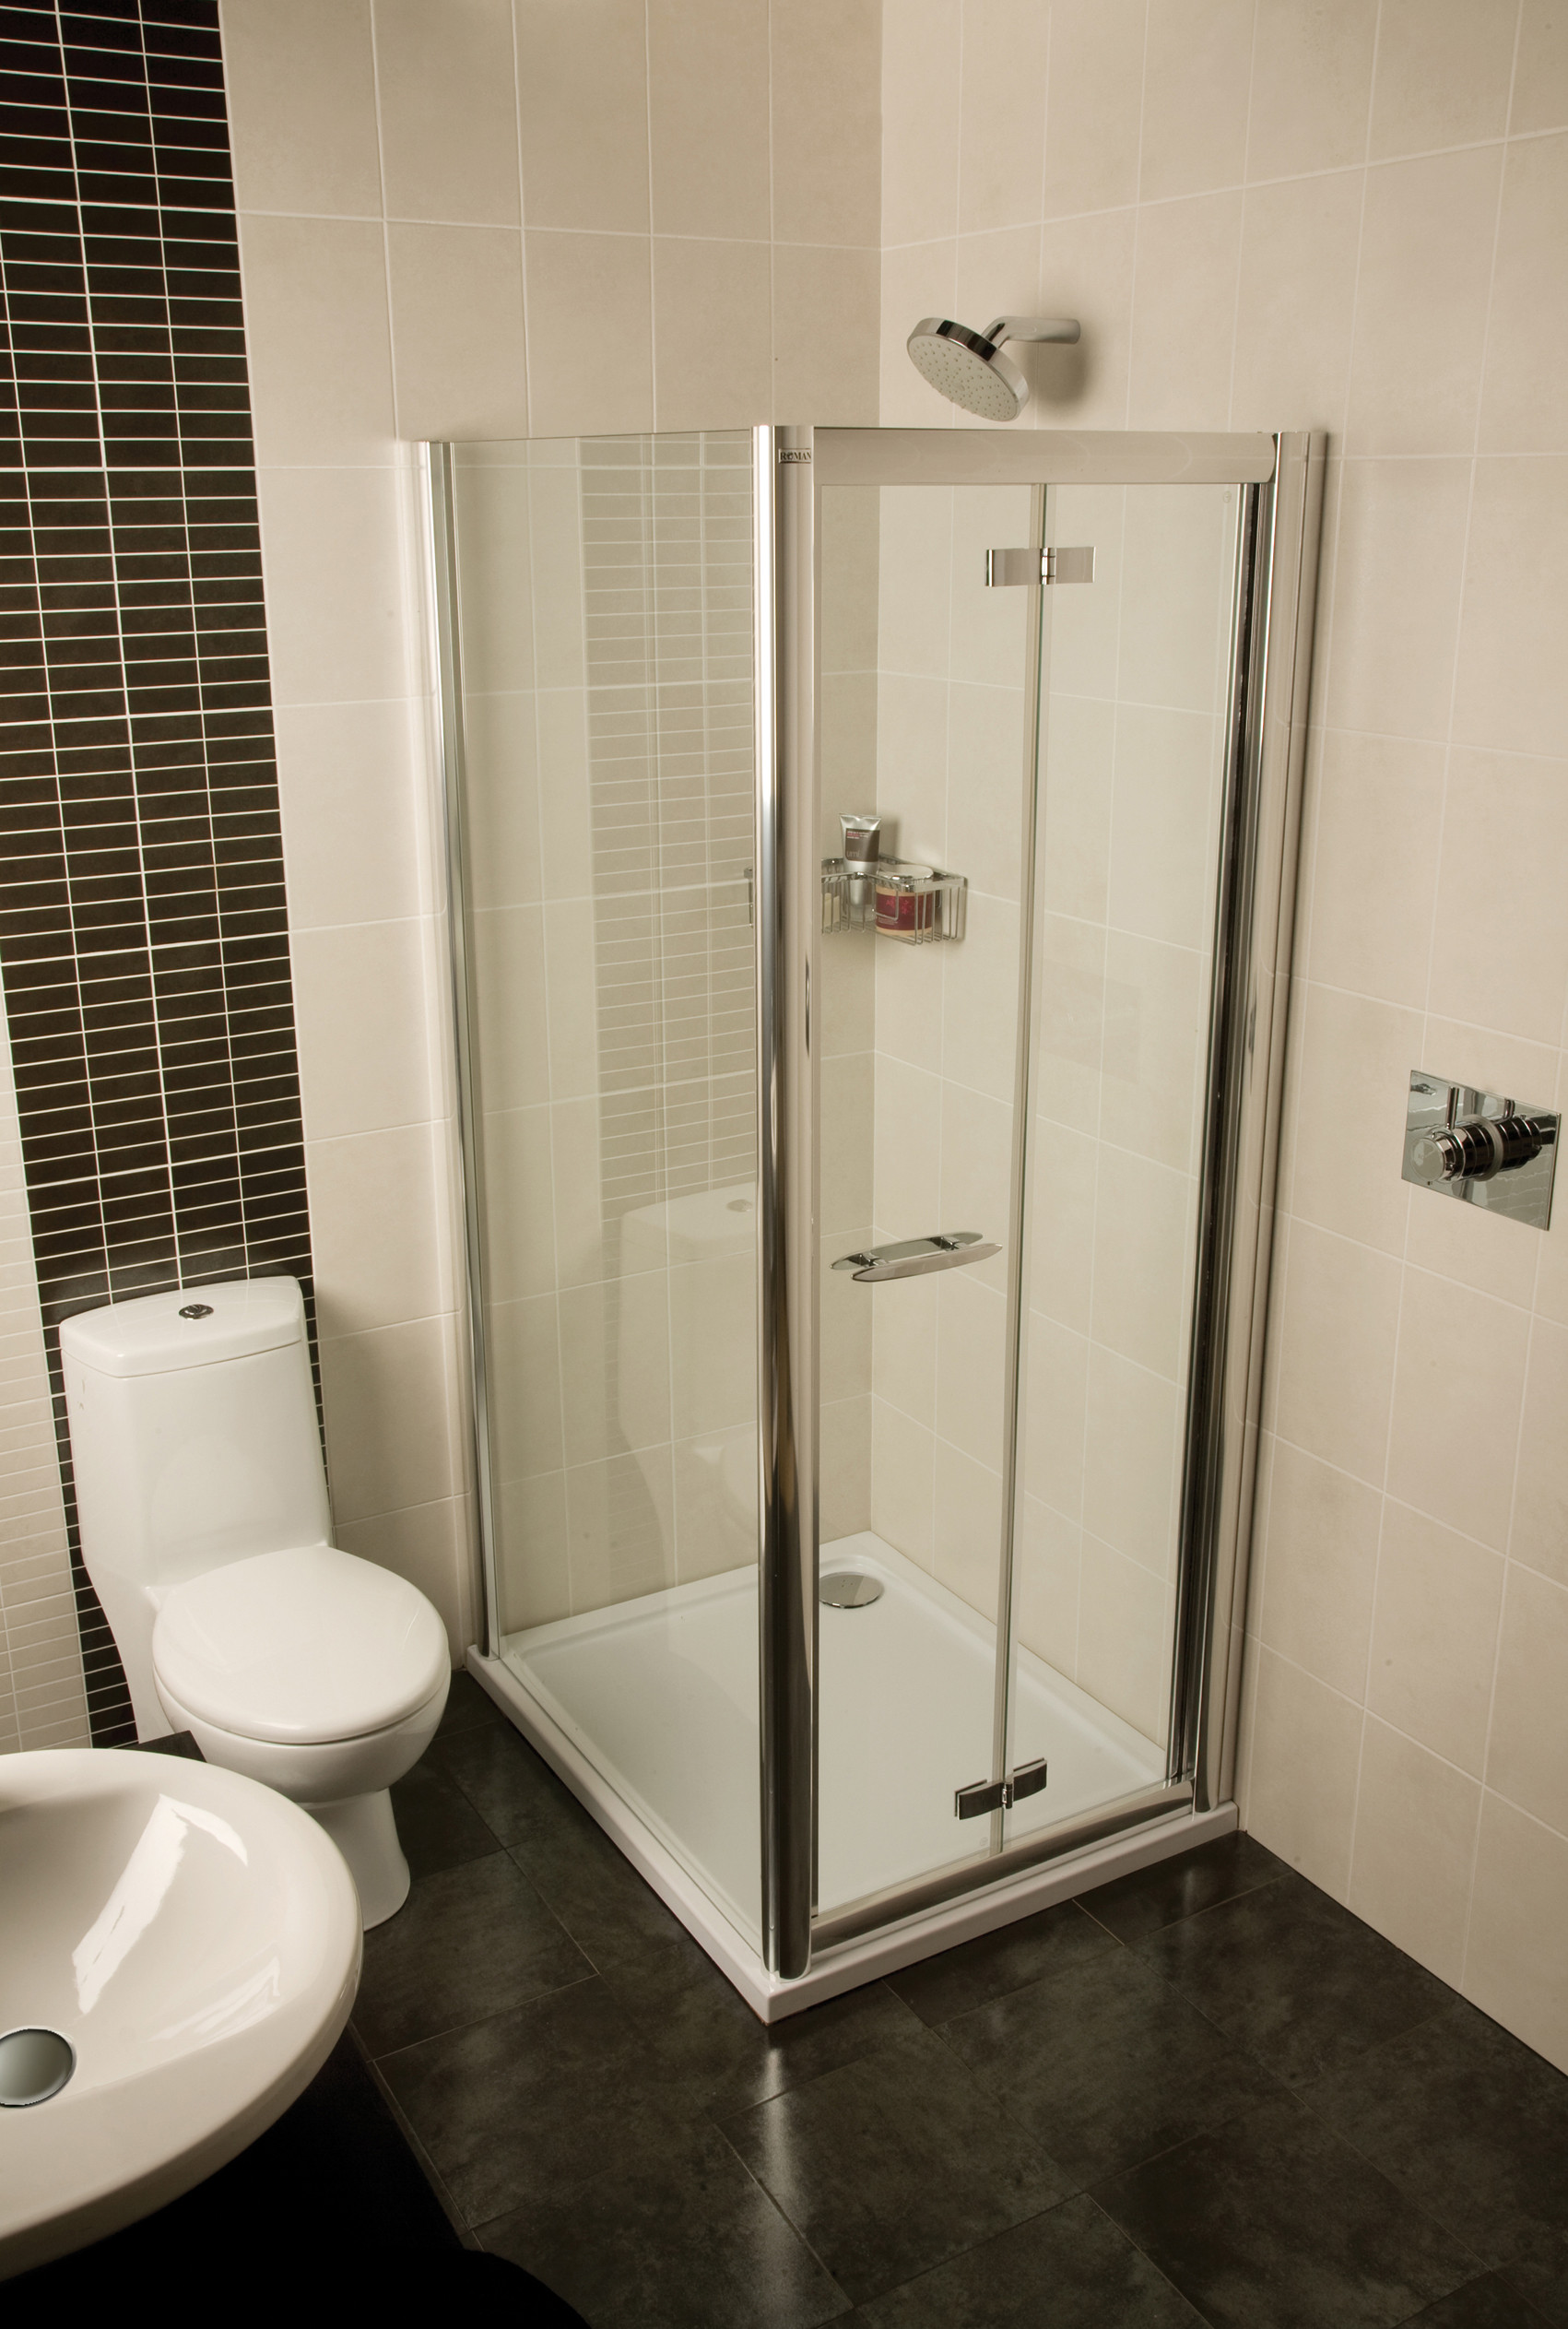 Small Bathroom Shower
 Space saving shower solutions for small bathroom